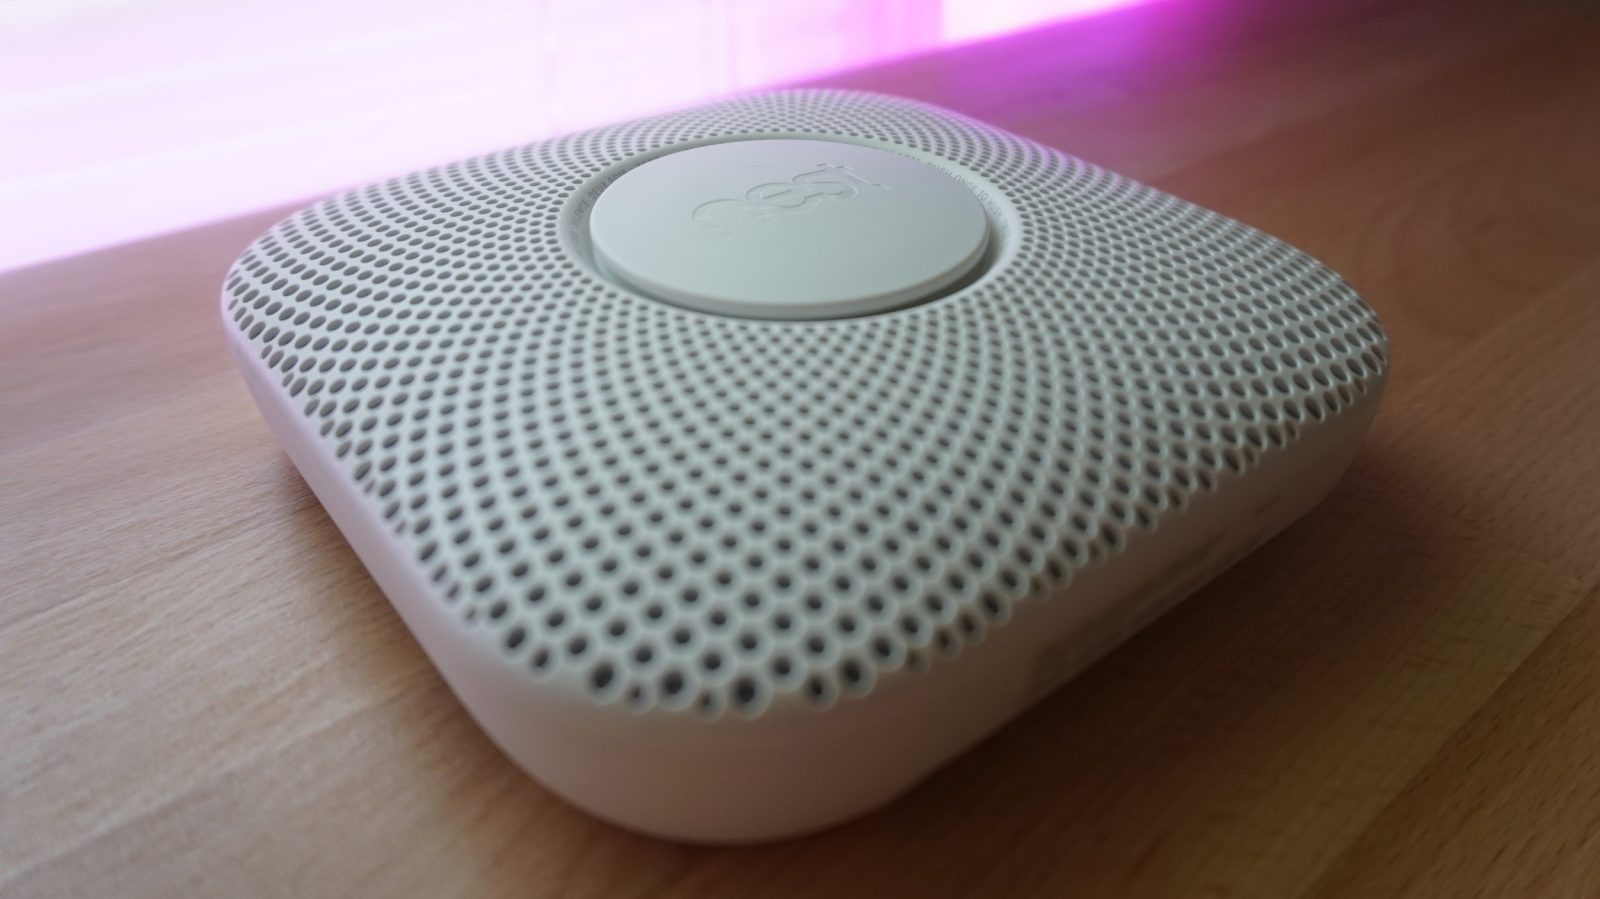 Nest Diary: With Nest Protect, you're buying peace of mind and an awesome  night light